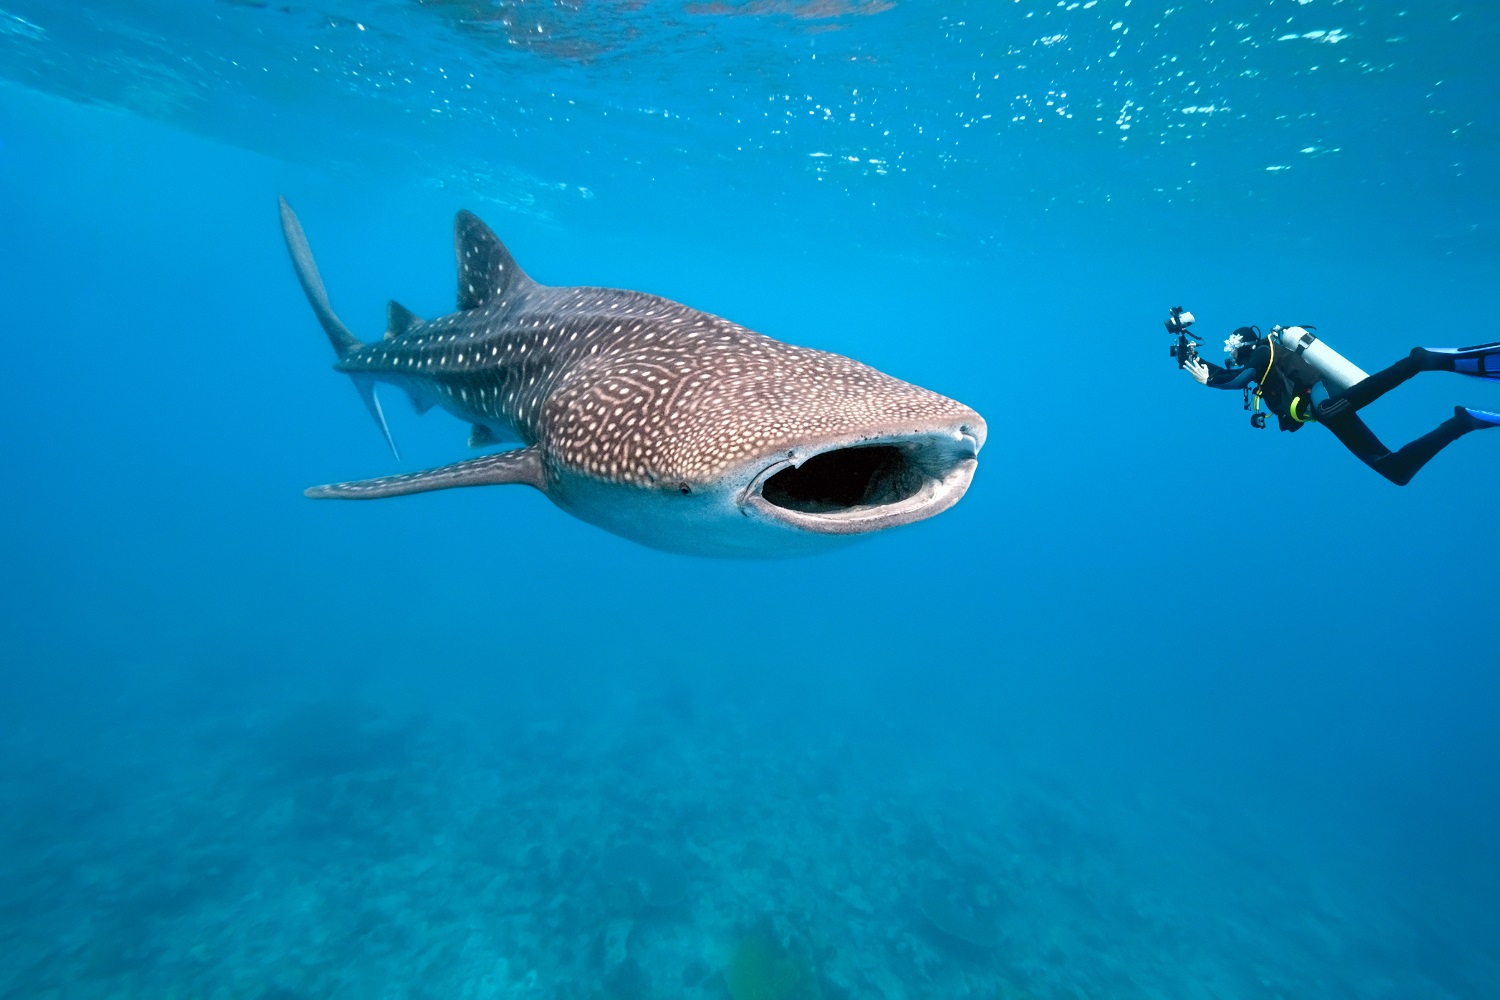 A scuba diver photographs a giant whale shark underwater in Belize, which is where to go scuba diving in April for megafauna